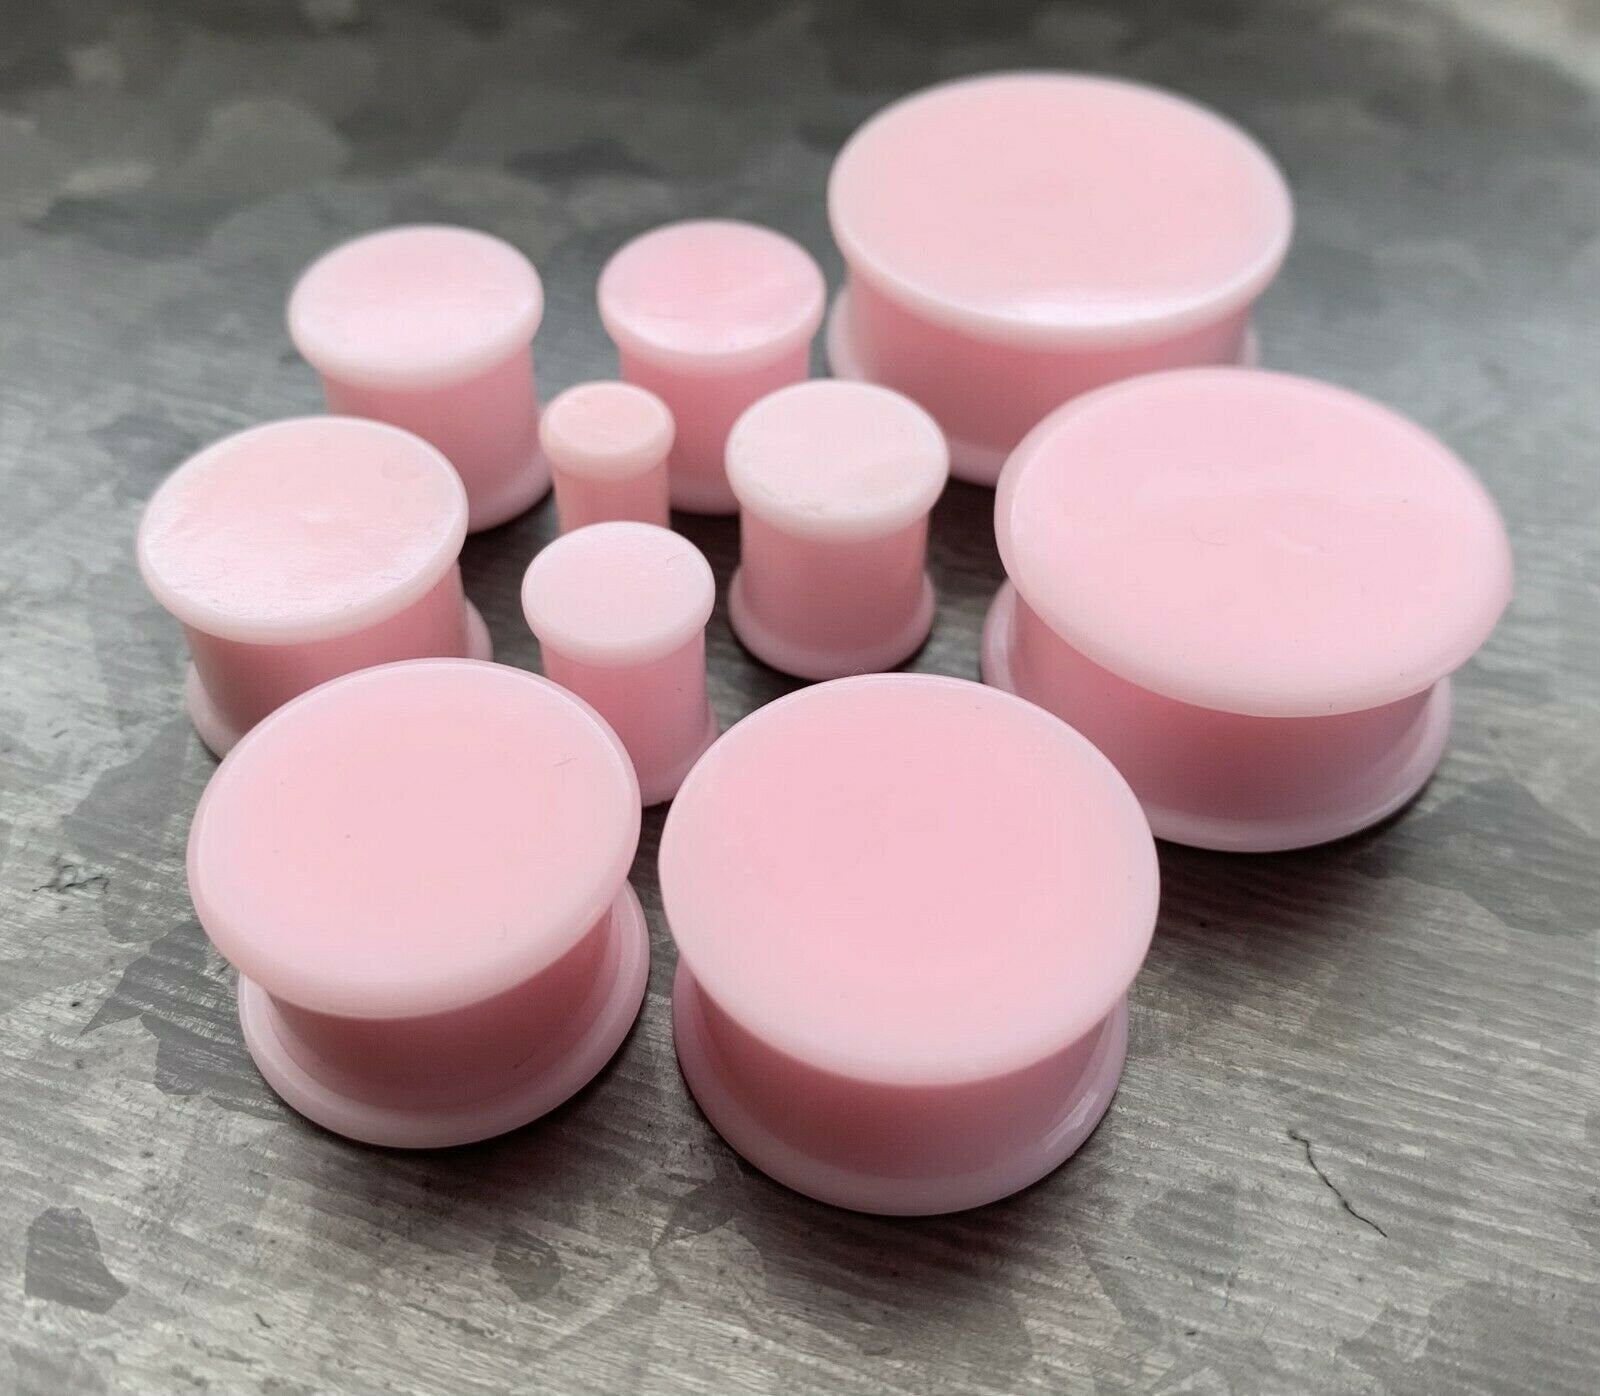 PAIR of Stunning Baby Pink Solid Silicone Double Flare Plugs - Gauges 2g (6mm) up to 51mm available!